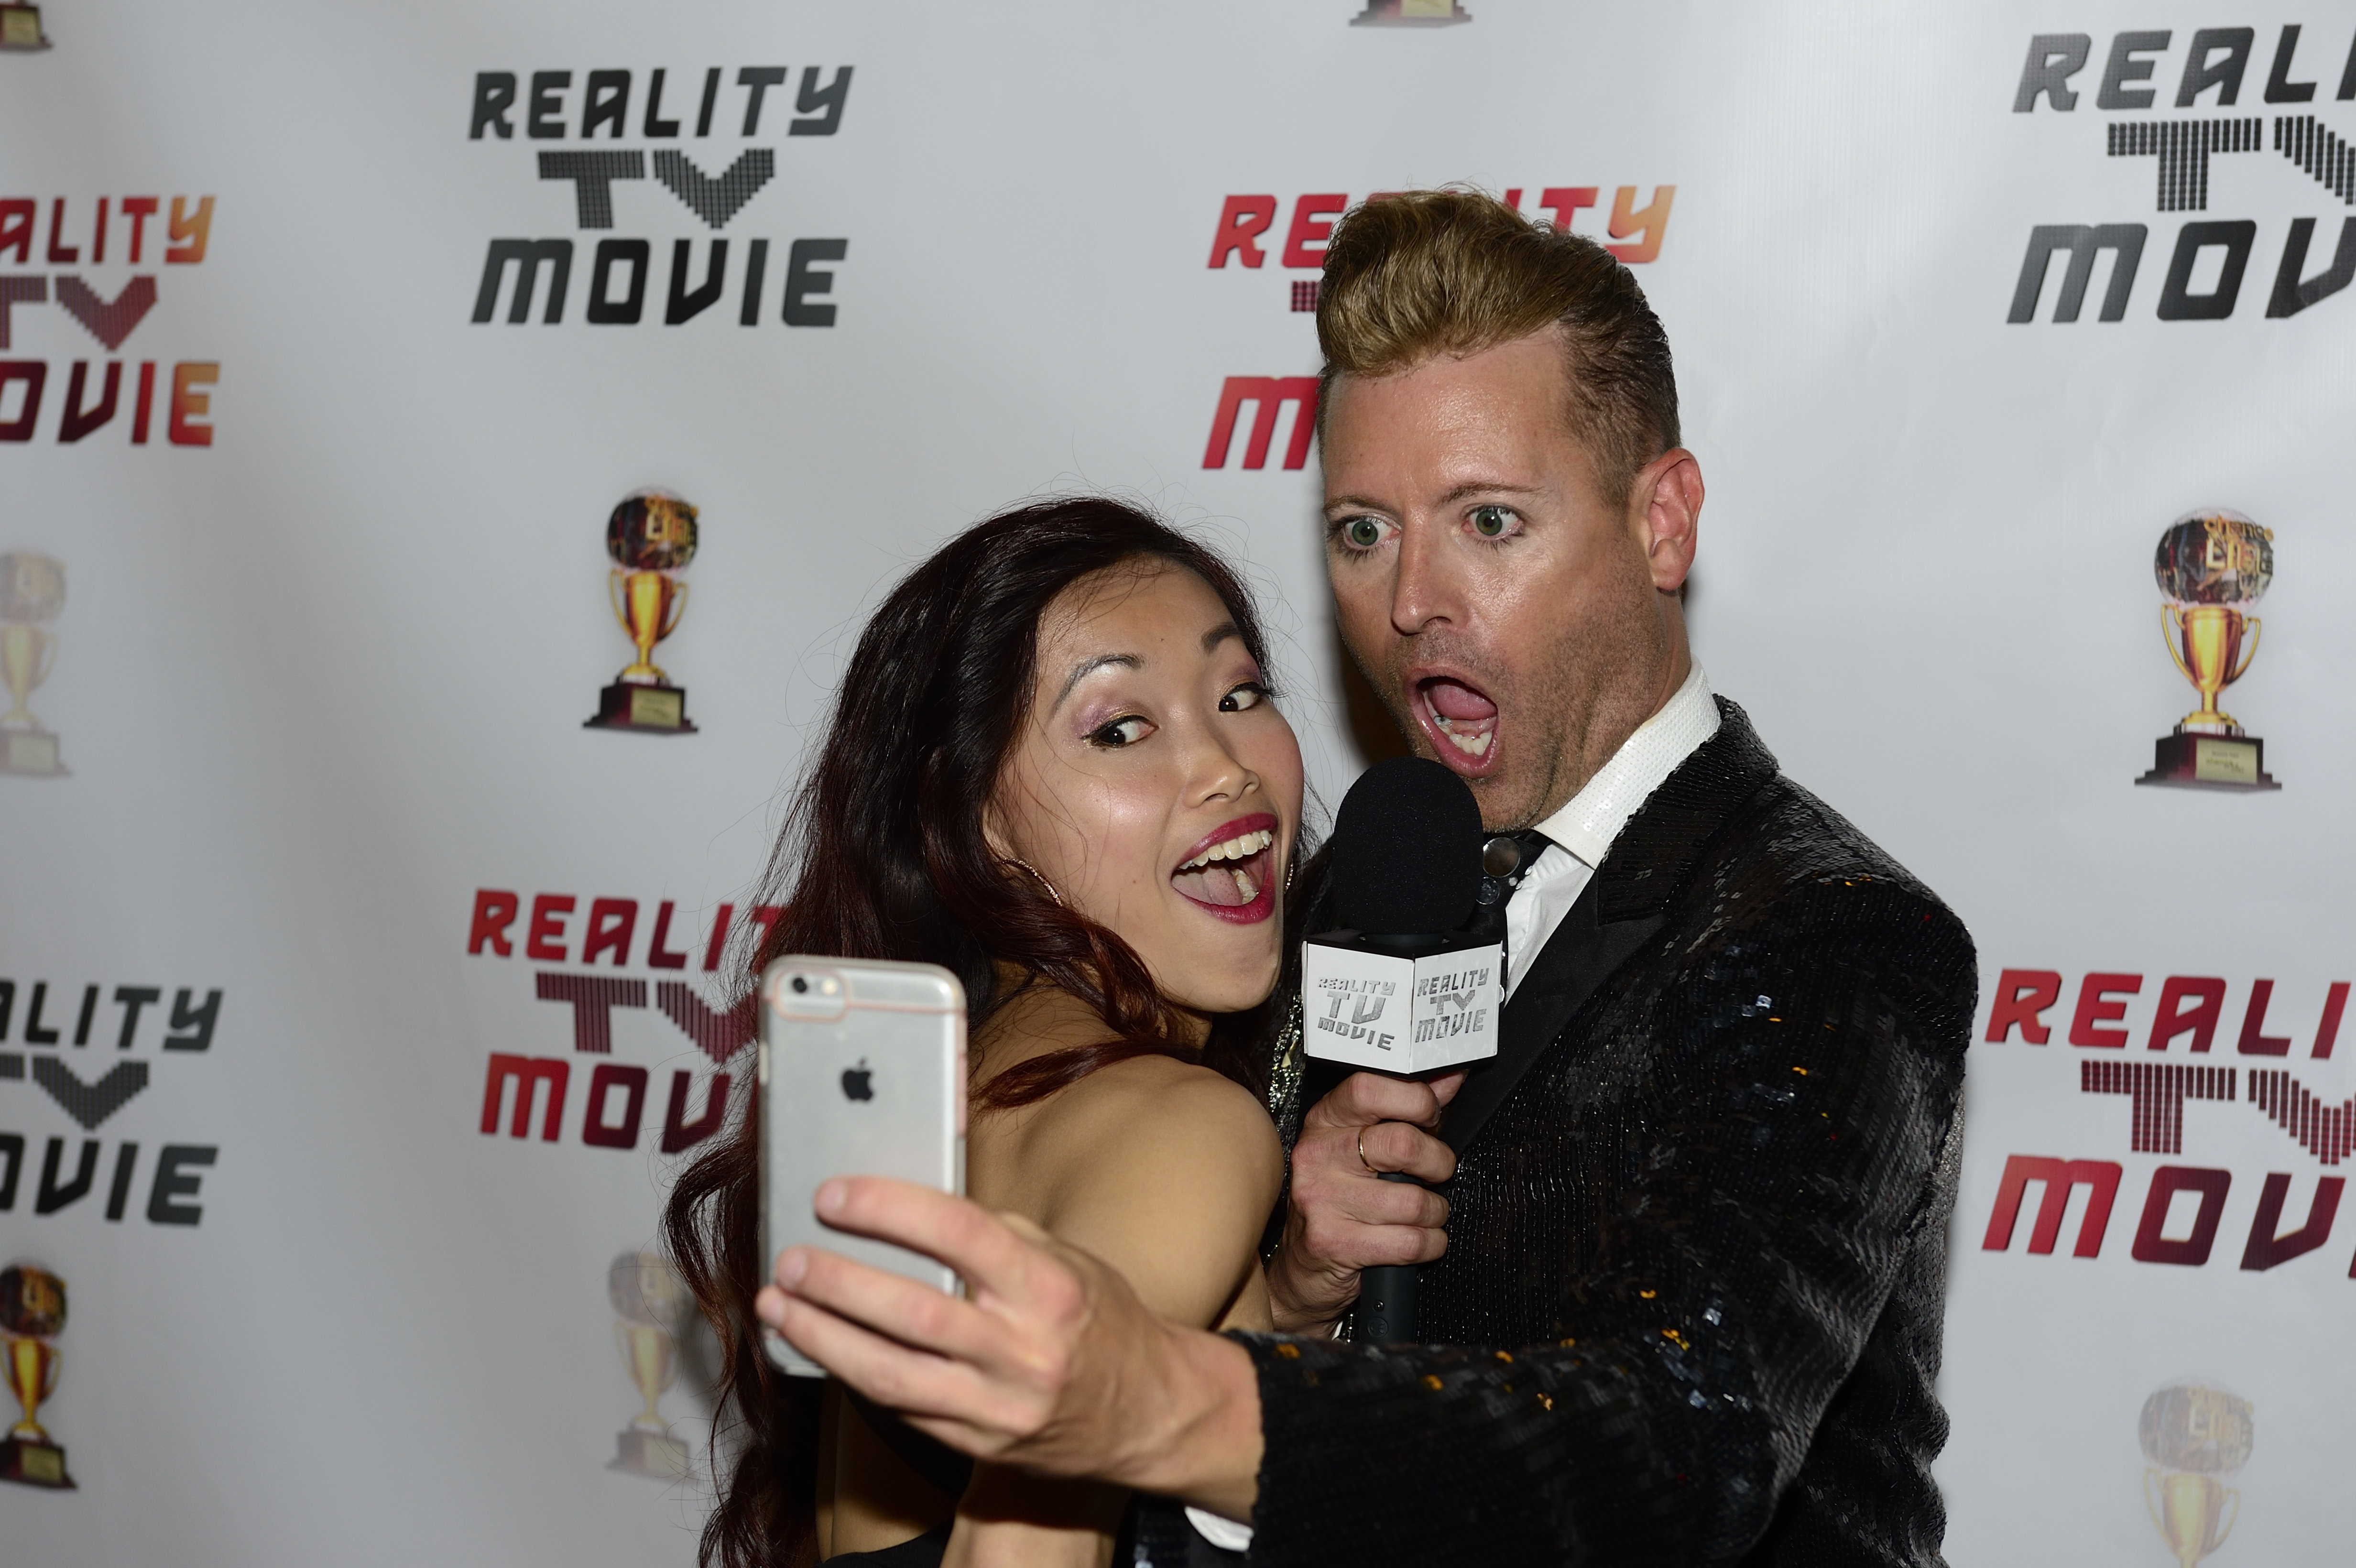 Actress Li Wen Ang with the host of the Reality TV Movie premiere, Patrik Gallineaux - November 13th, 2014.